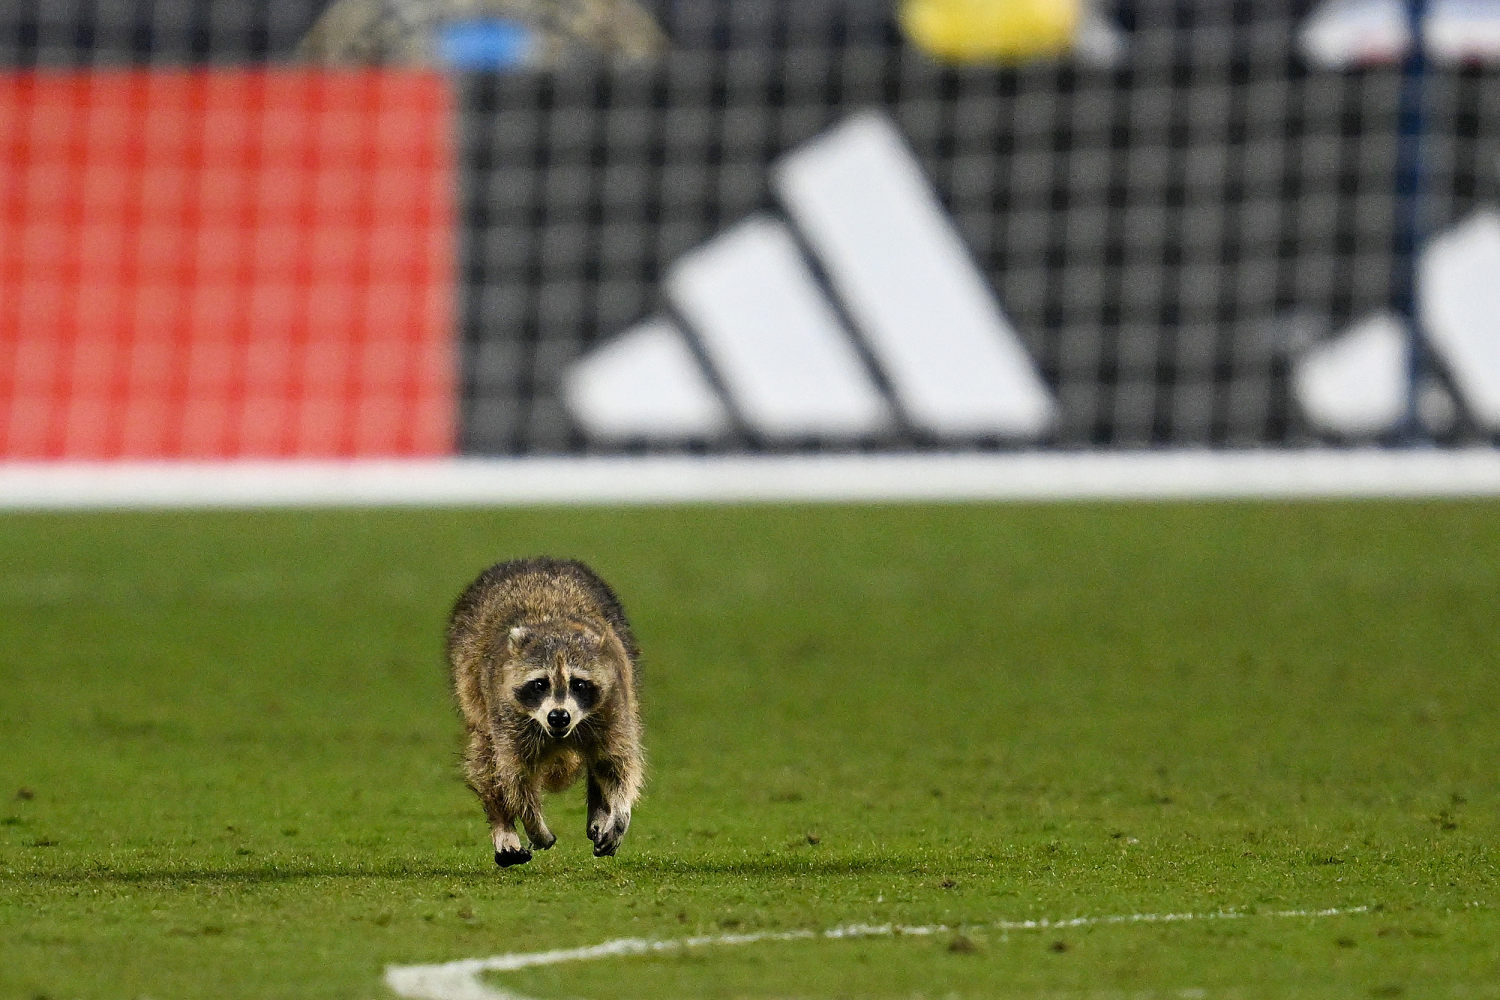 Raccoon invades field and dodges trash can-wielding officials at soccer game